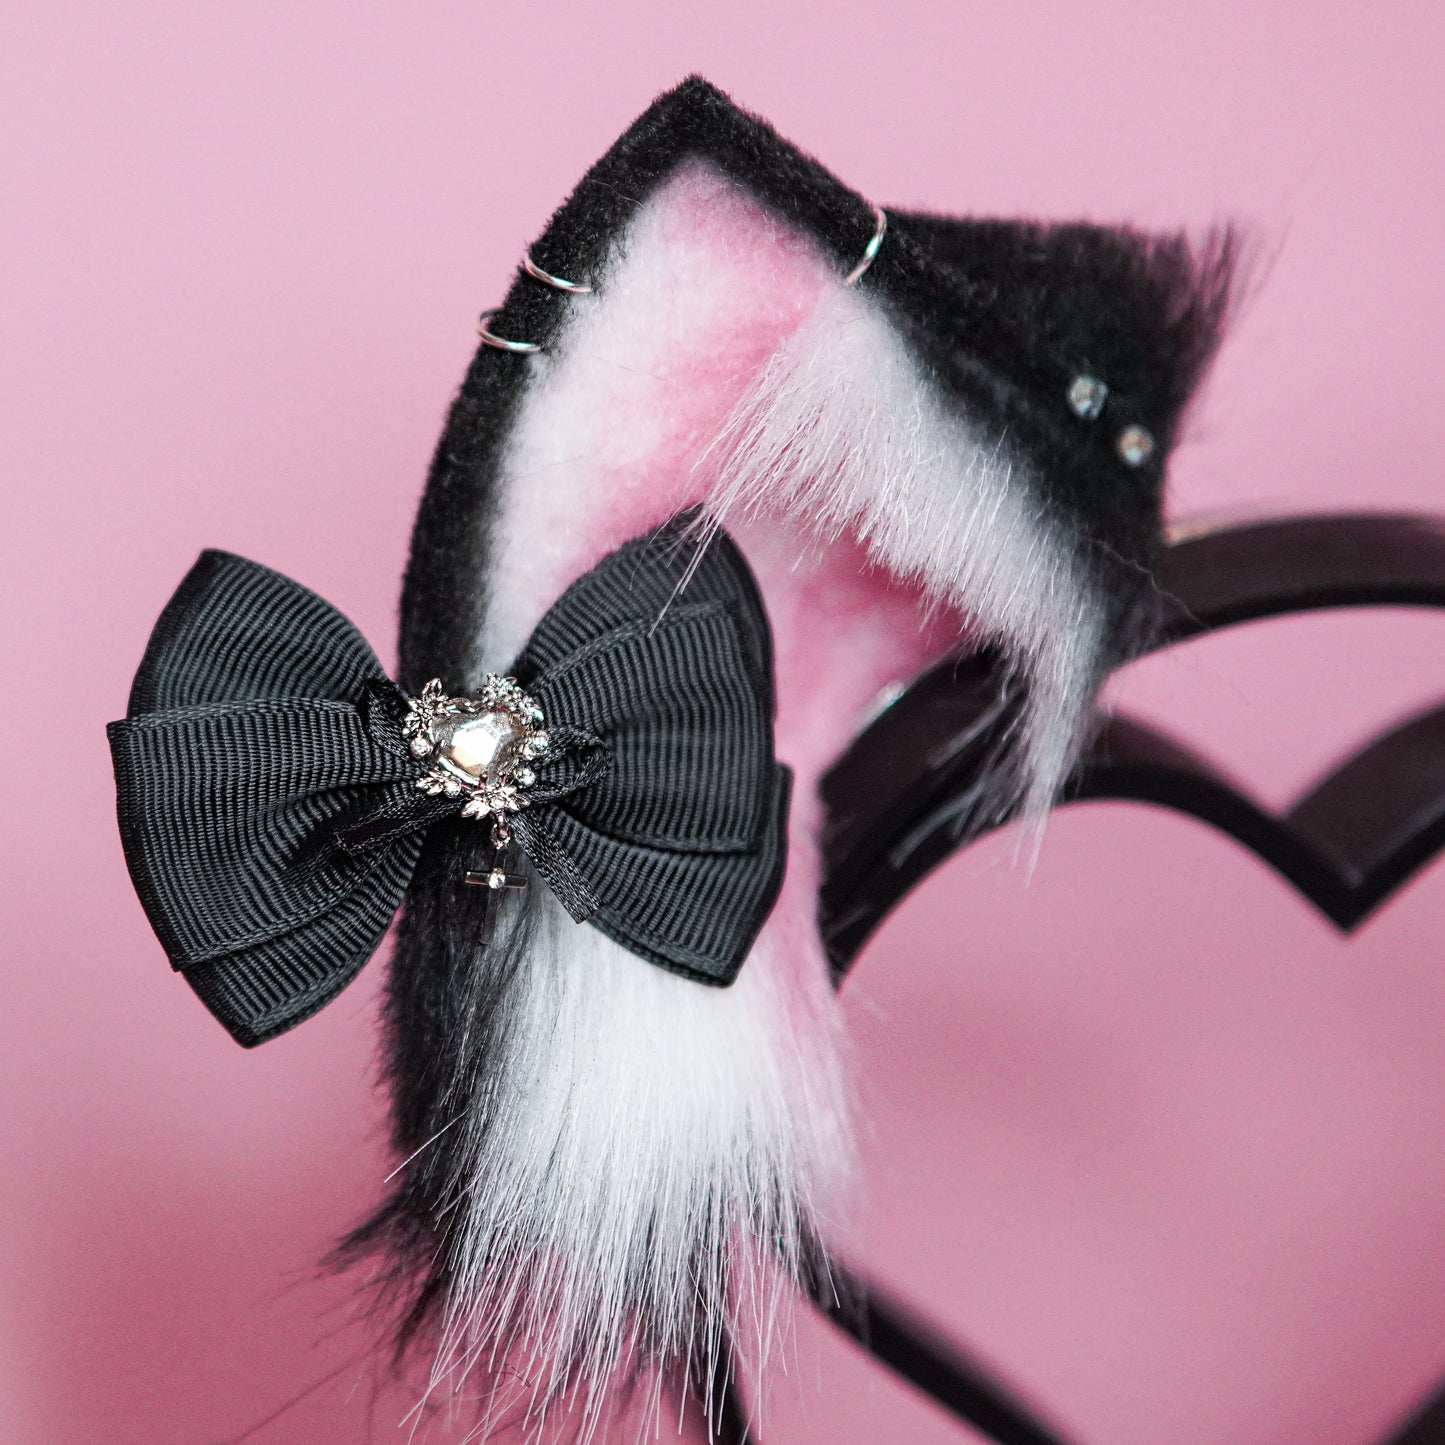 Unmatched Cat Ears in black and pink with charms